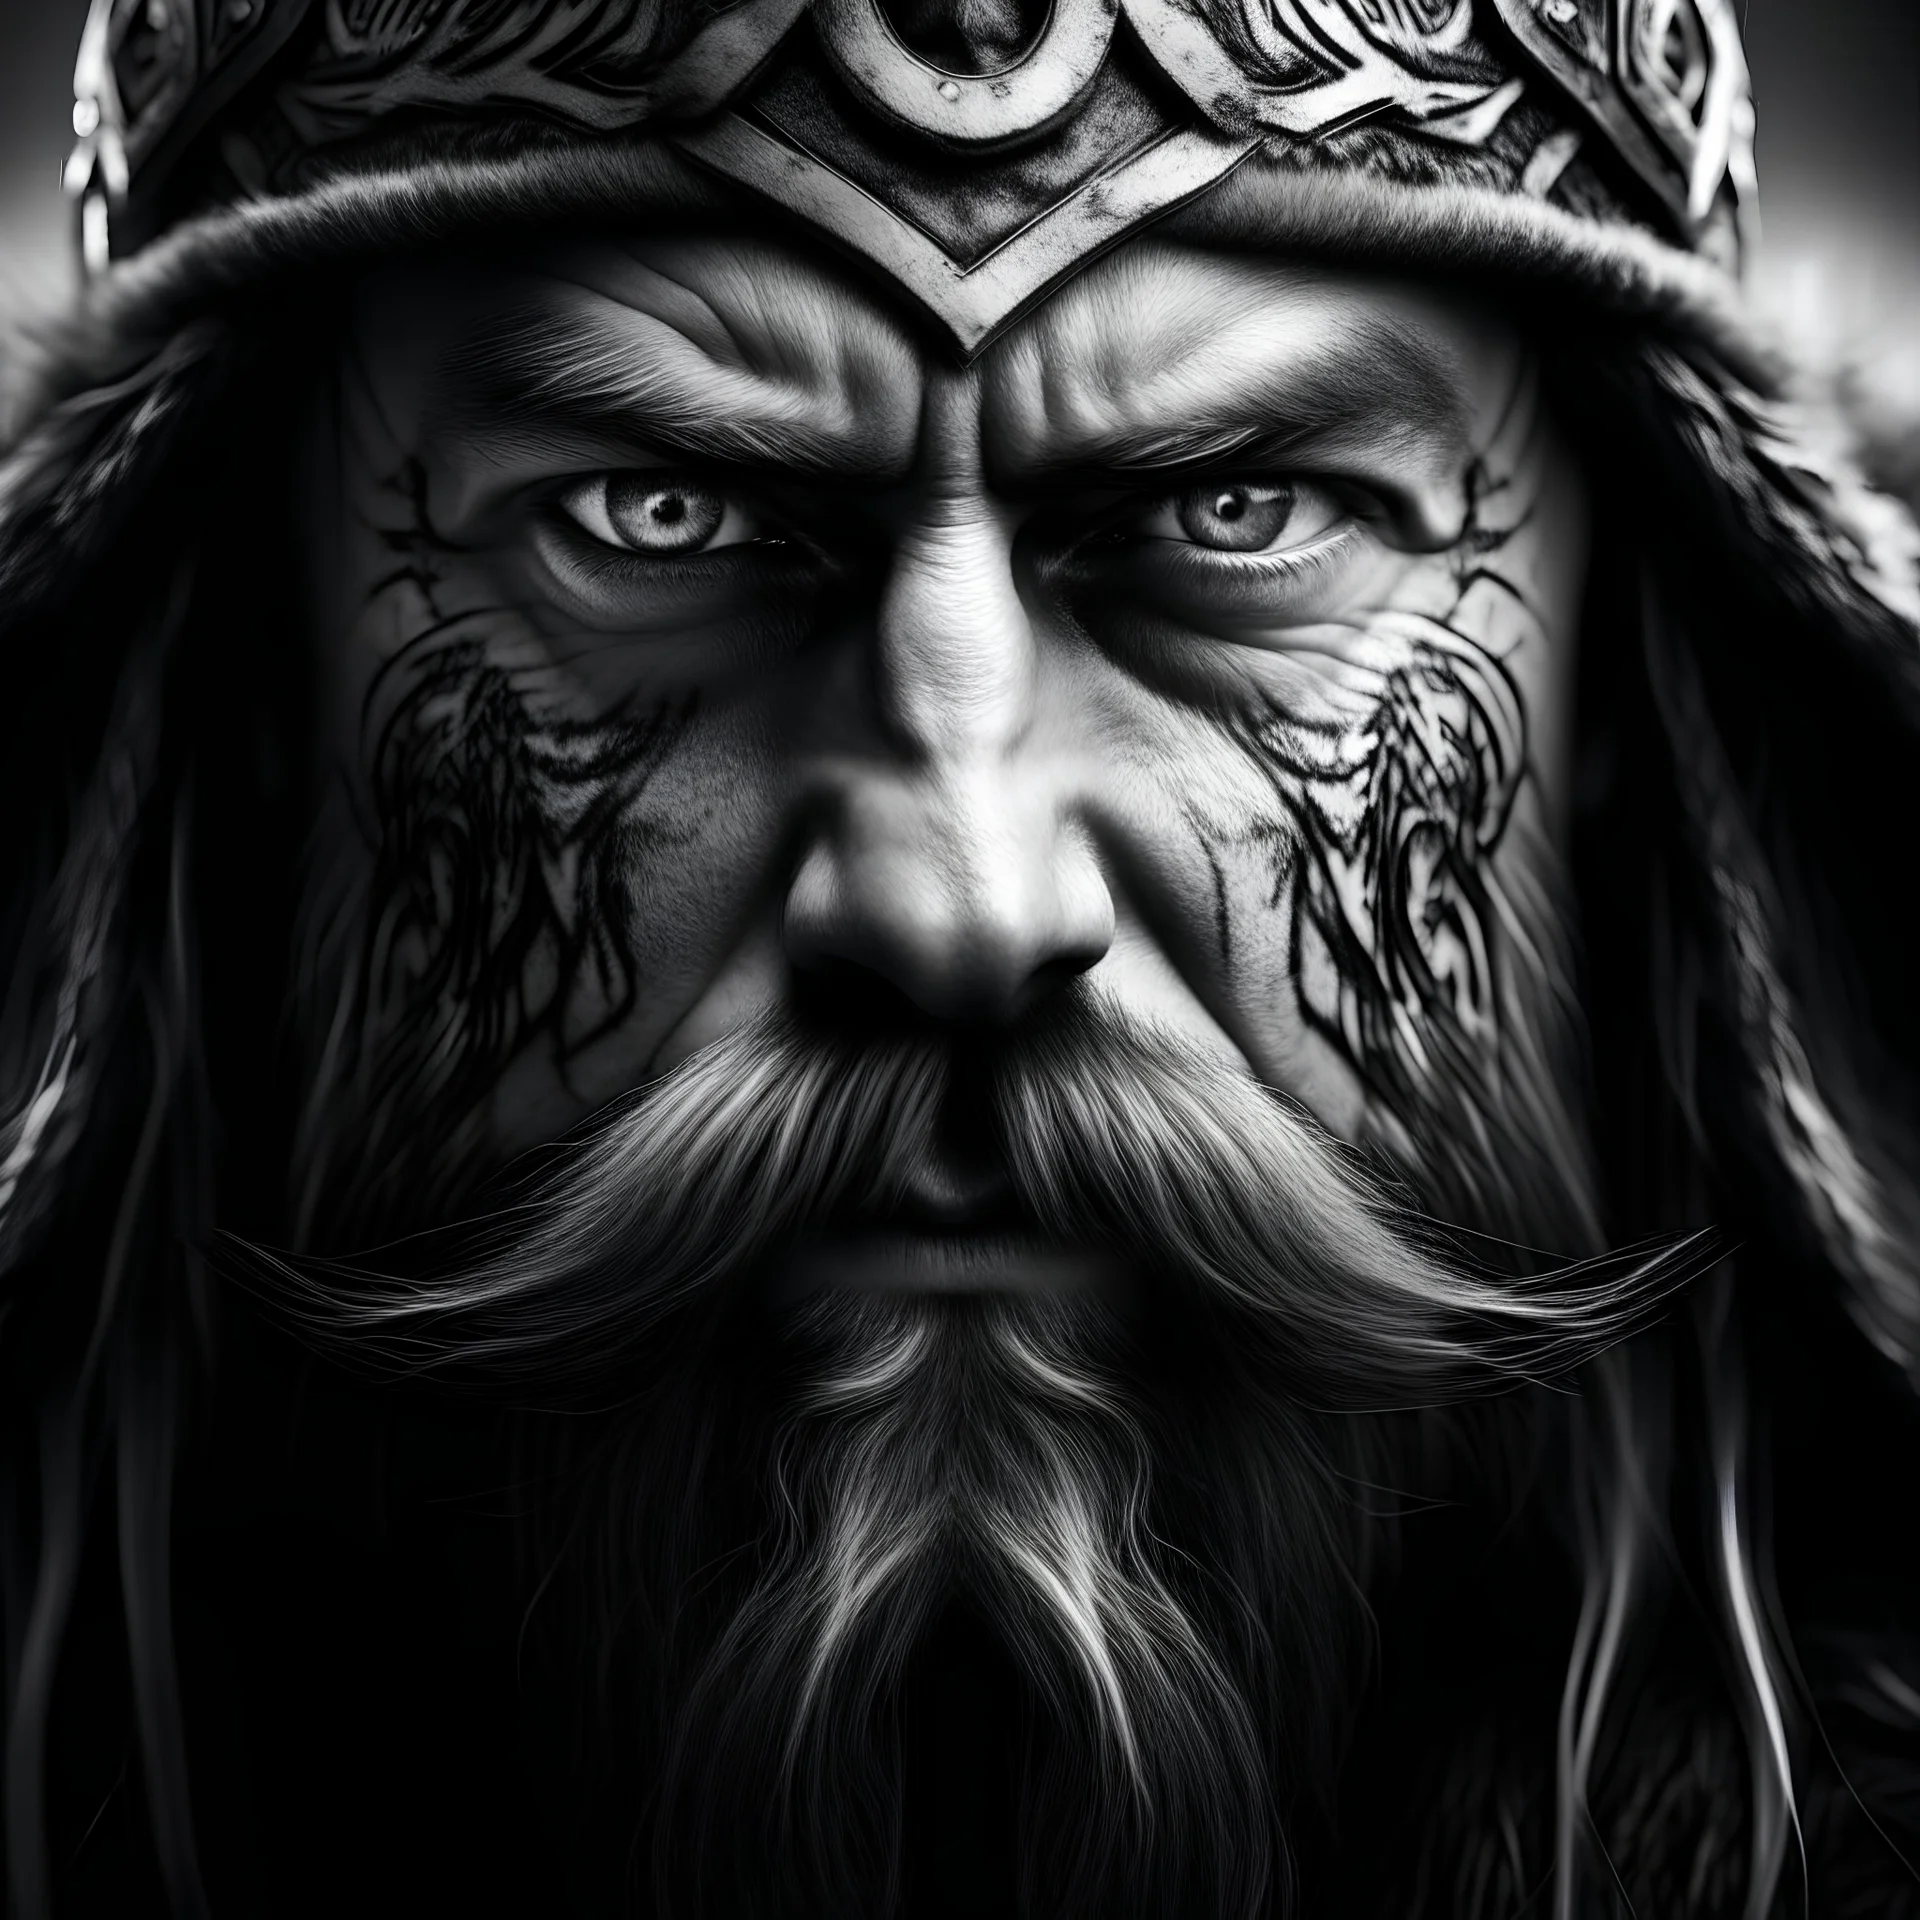 black and white album art of Odin with a blue eye, looking over midgard